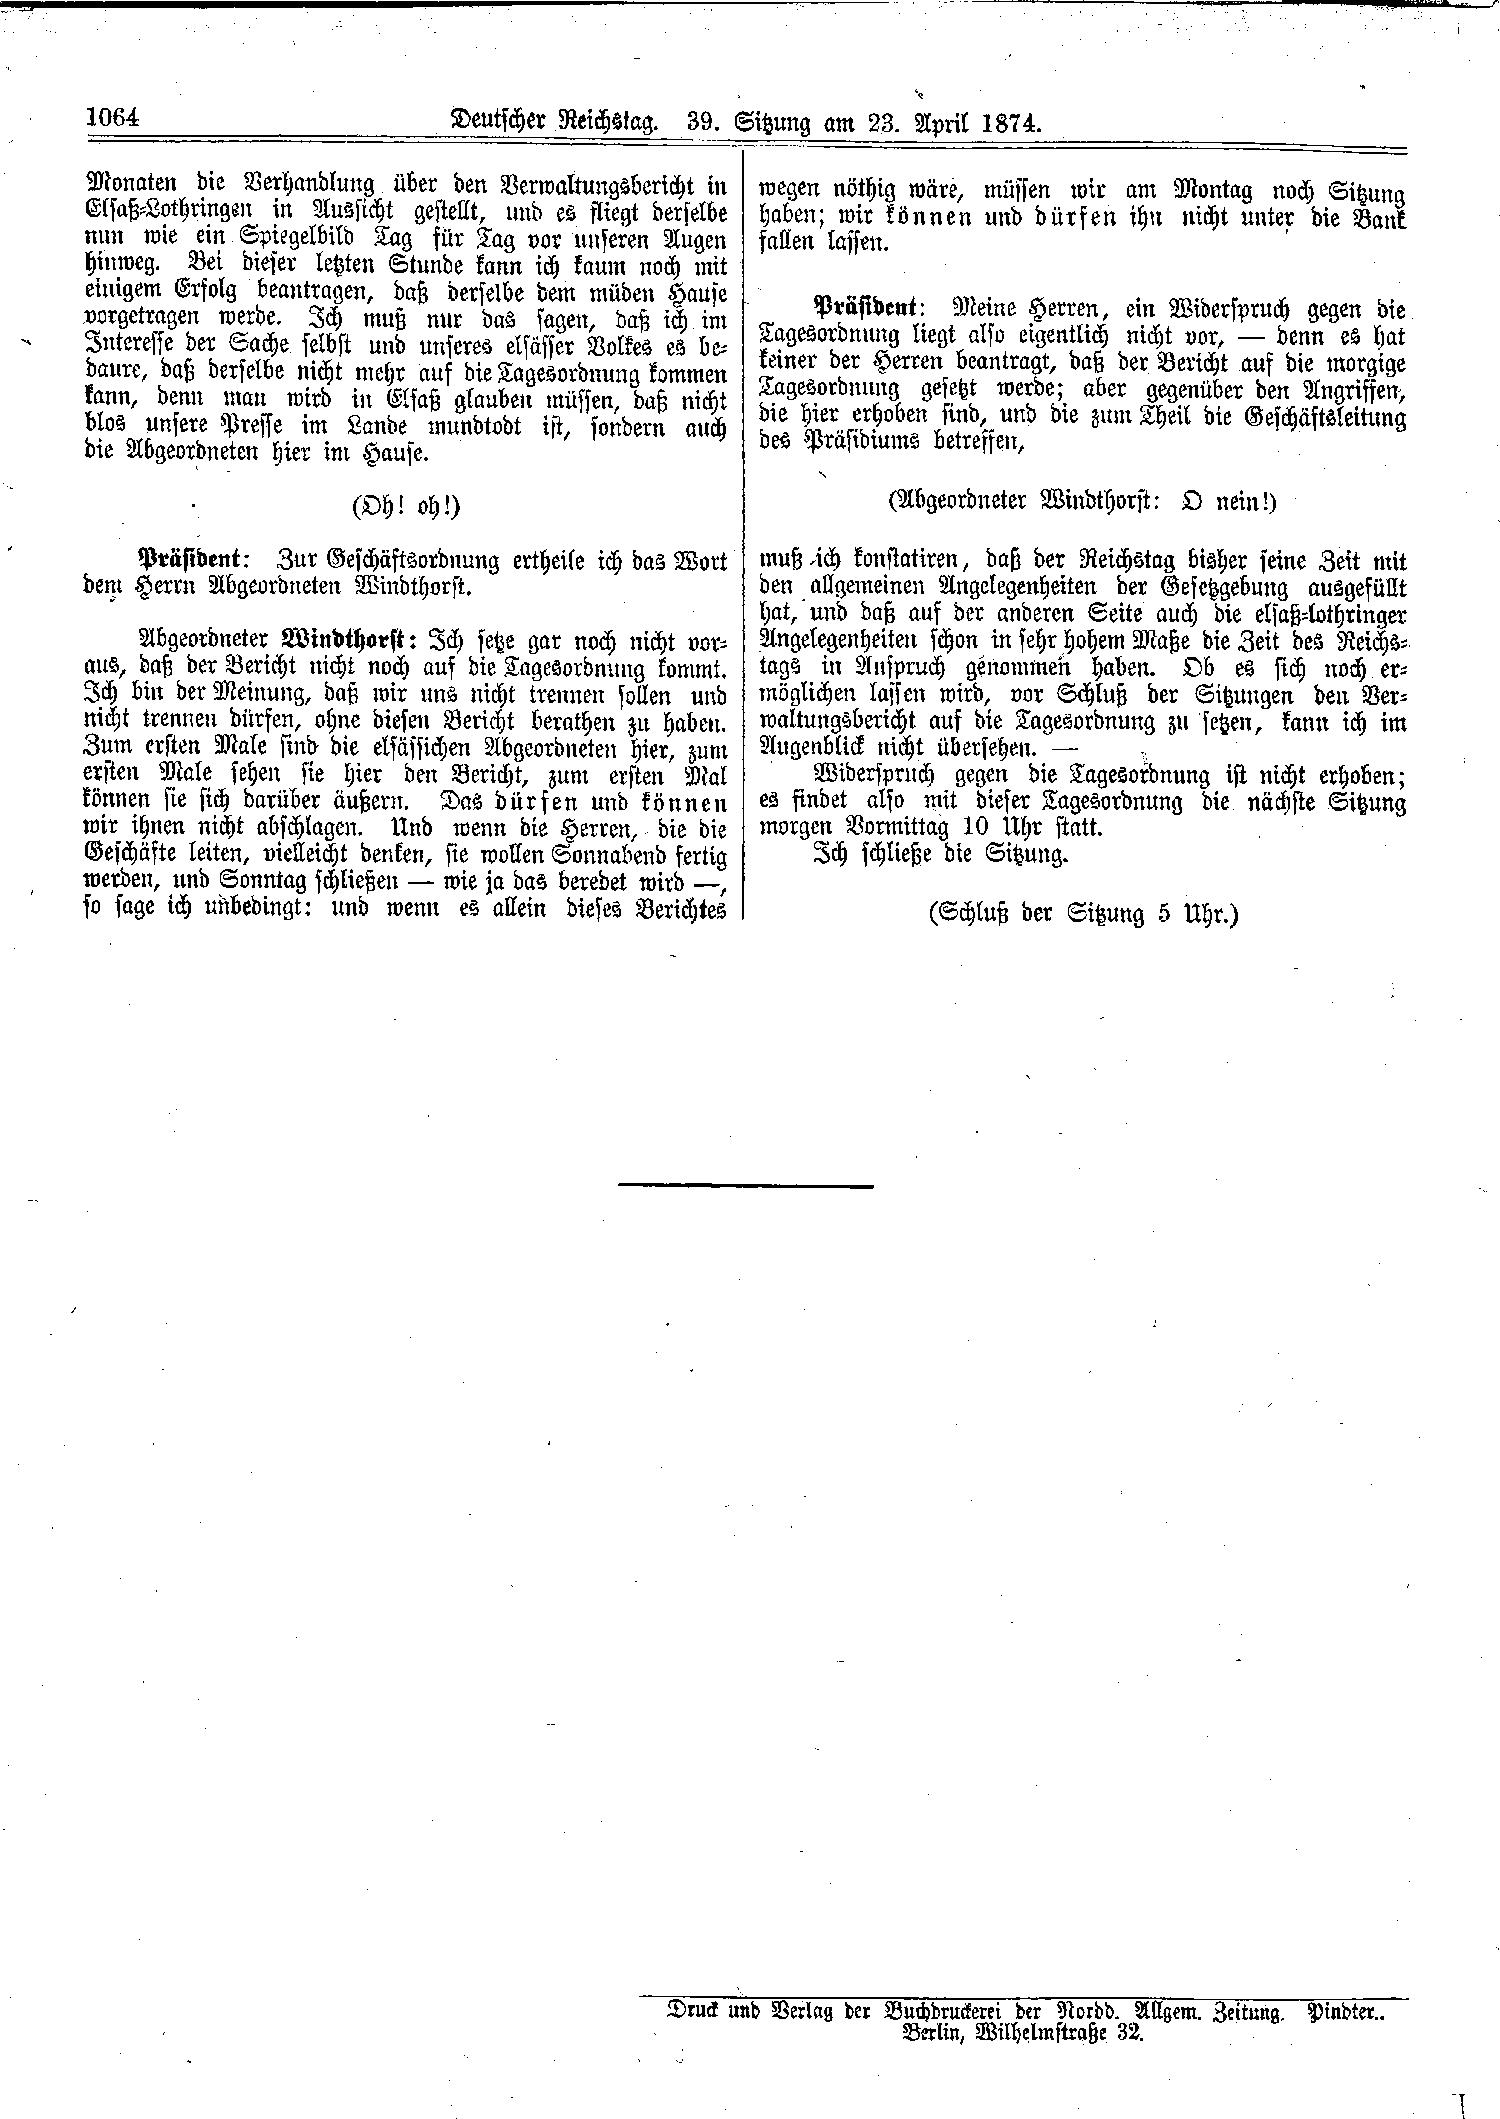 Scan of page 1064